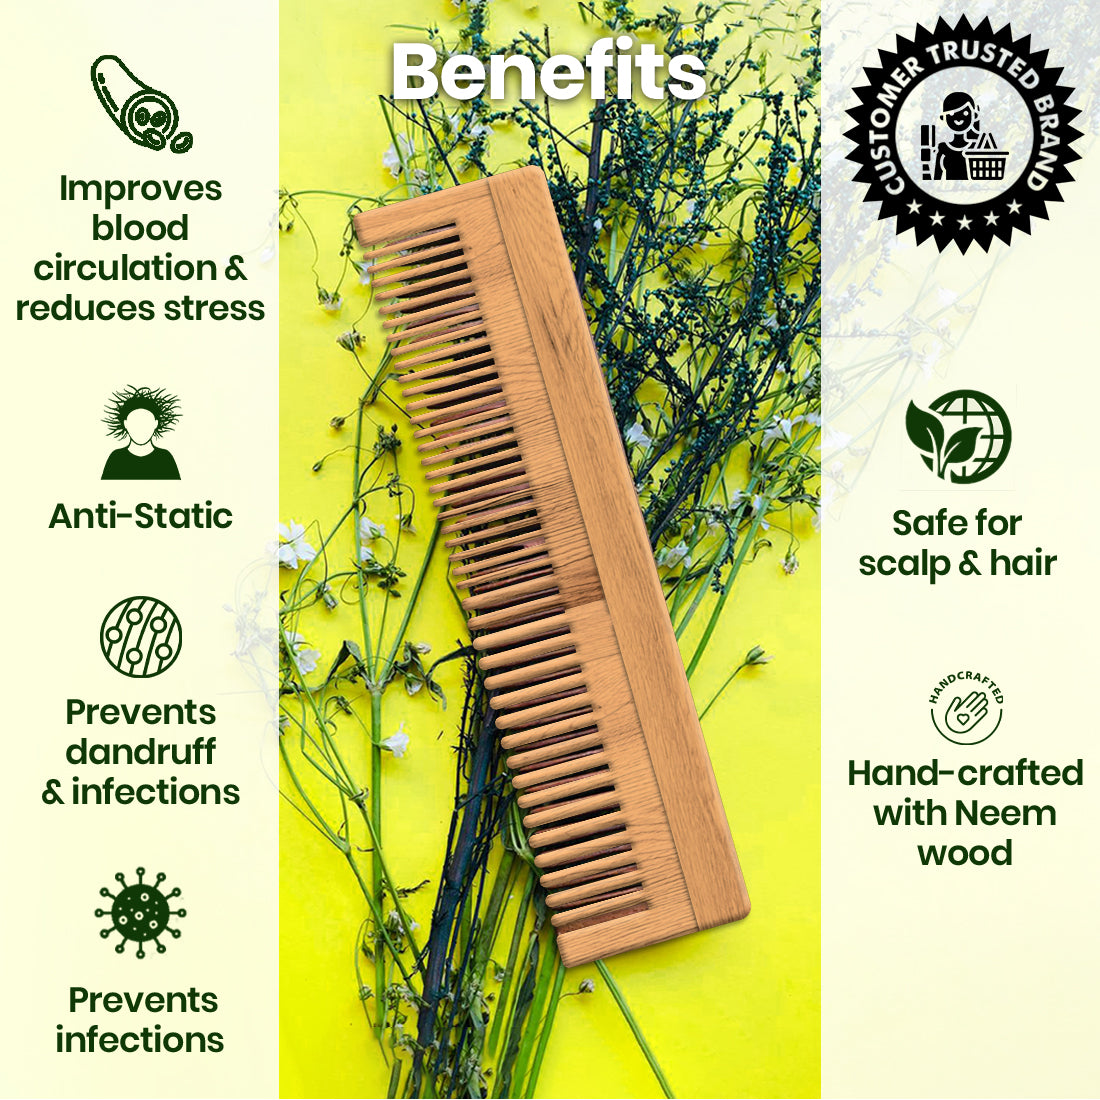 Buy Herbal Brews  Desi Neem Wooden Comb for Women  Men  Hair Growth   AntiBacterial Dandruff Remover  Hair Styling Comb  Handcrafted  Designer Online at Low Prices in India  Amazonin